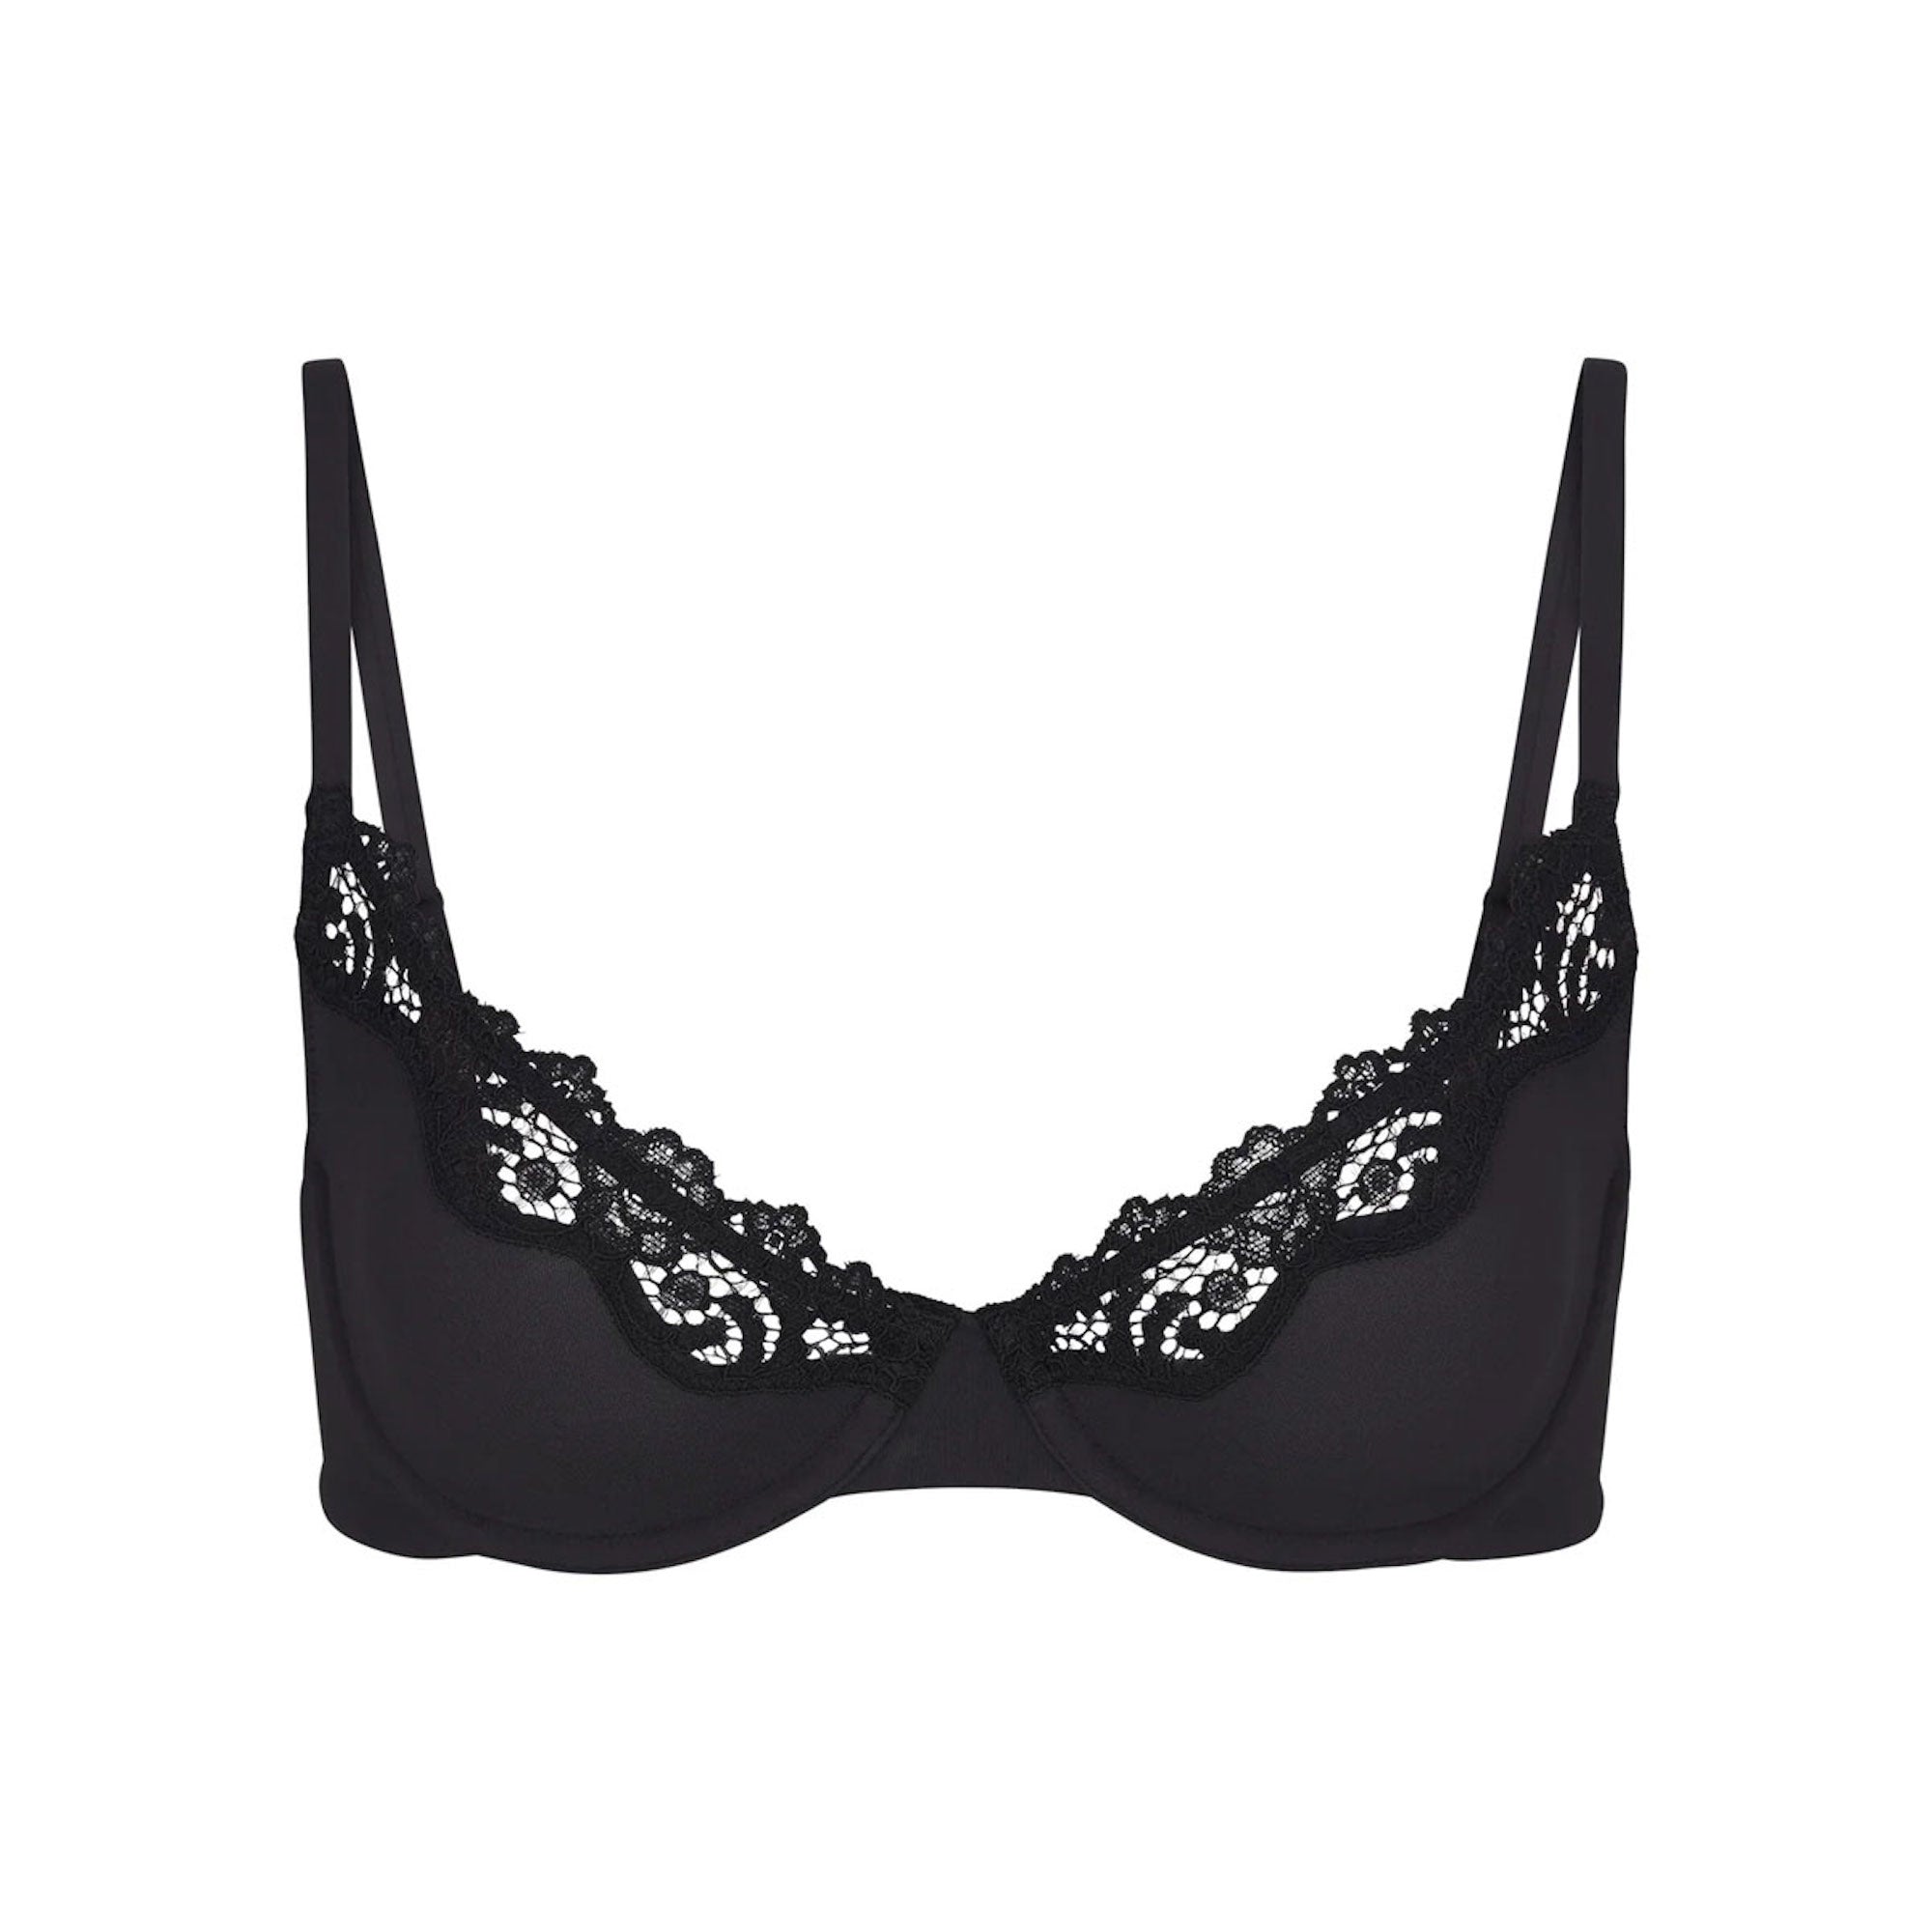 SKIMS Bra Black Size 38 C - $35 New With Tags - From chic